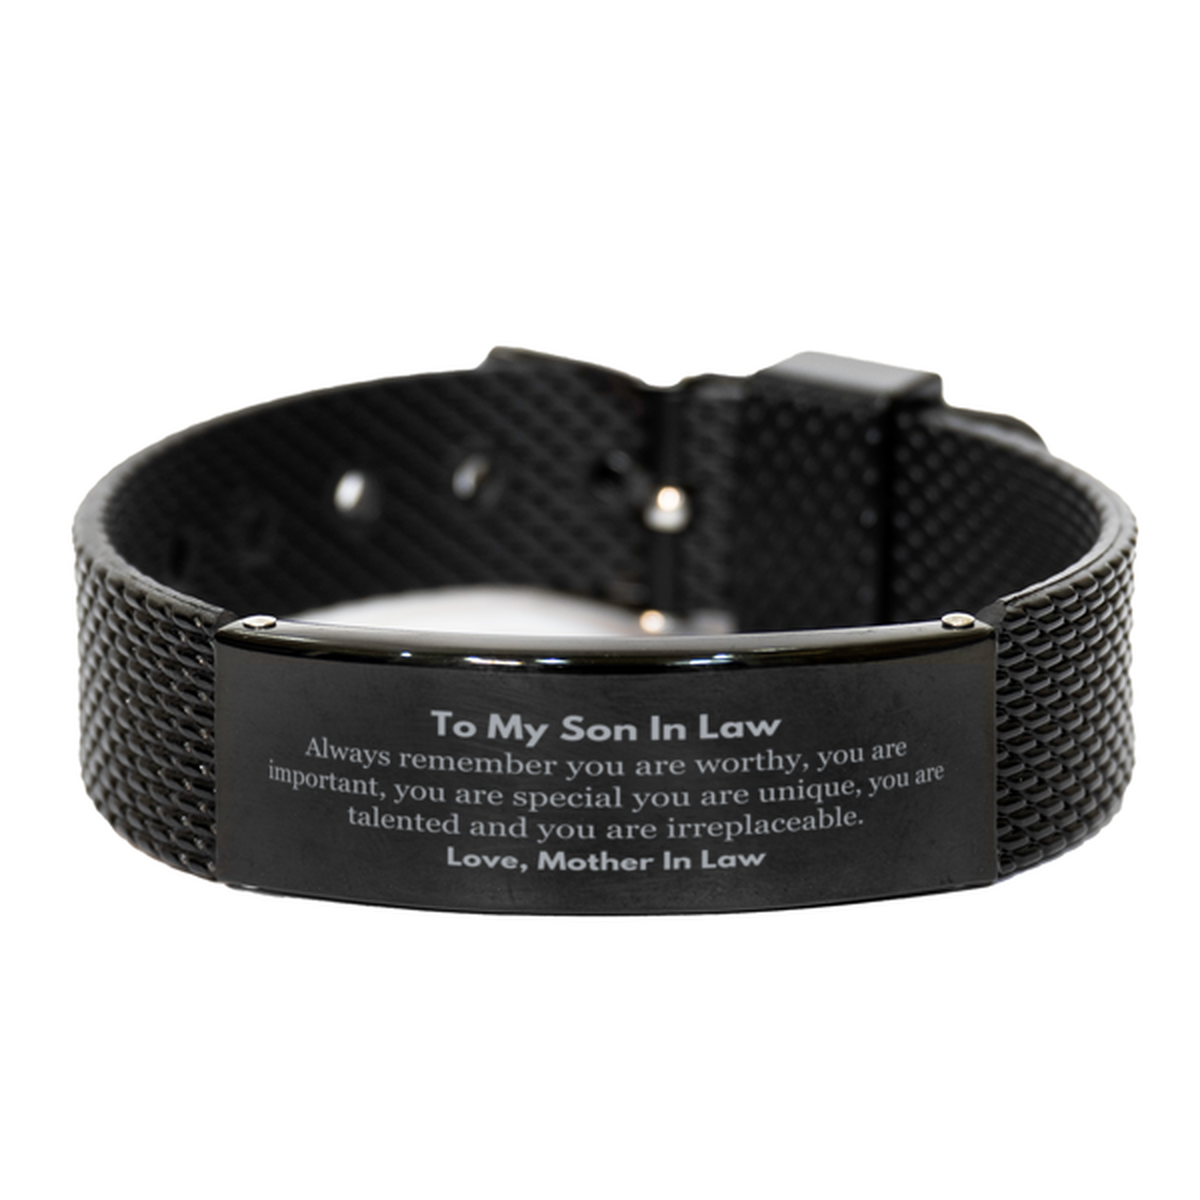 Son In Law Birthday Gifts from Mother In Law, Inspirational Black Shark Mesh Bracelet for Son In Law Christmas Graduation Gifts for Son In Law Always remember you are worthy, you are important. Love, Mother In Law